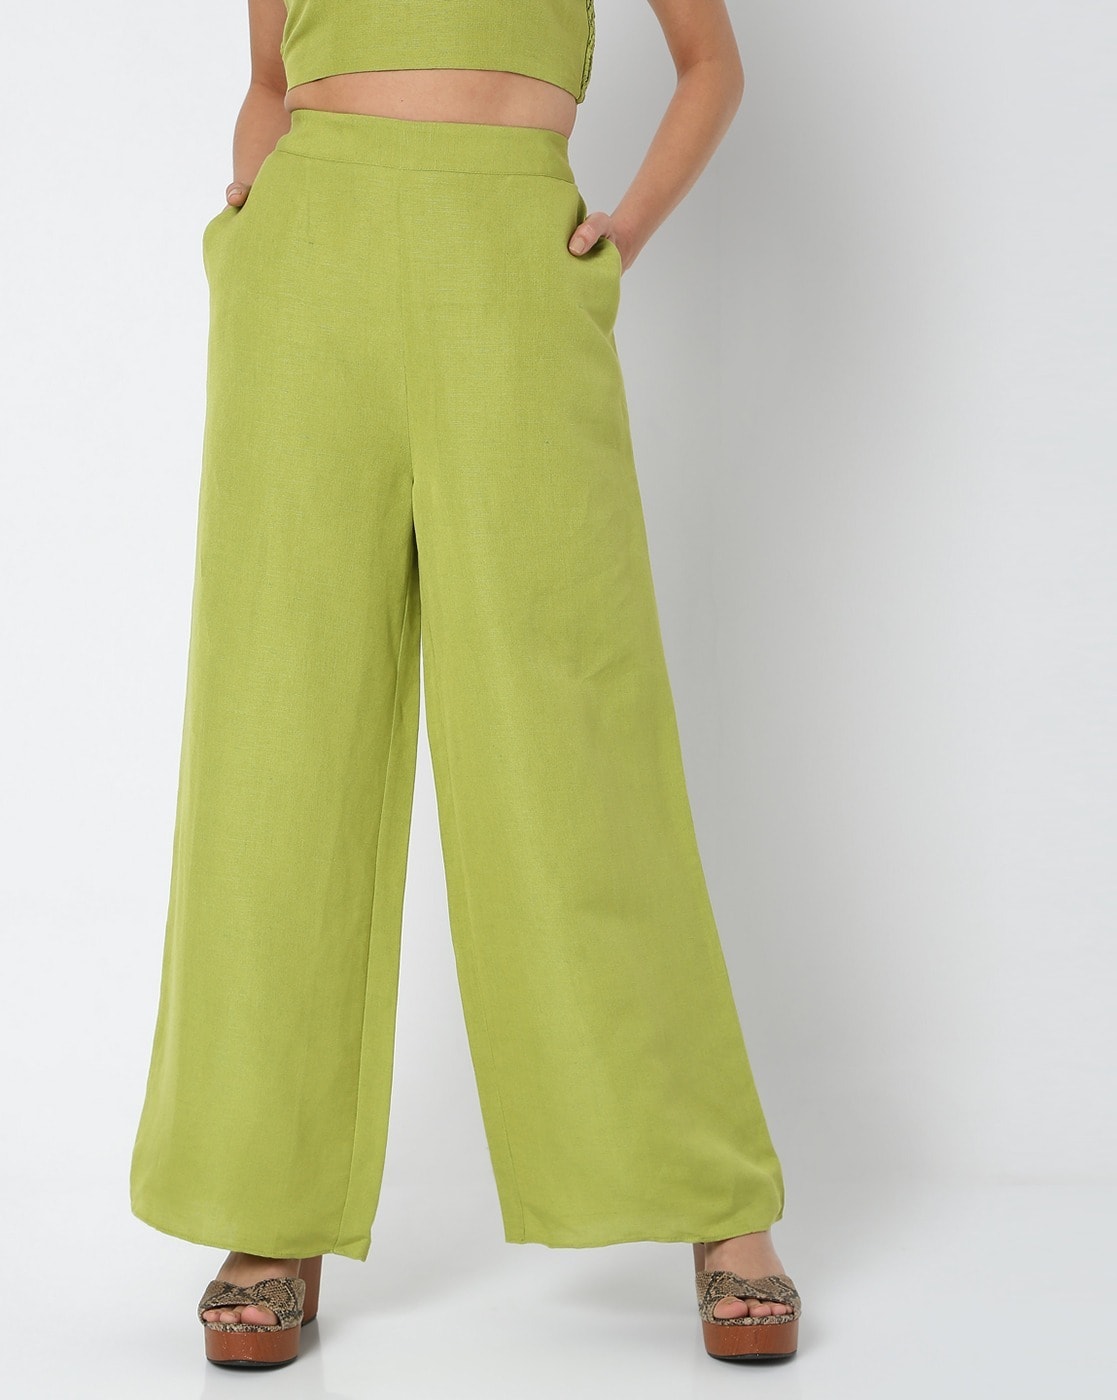 Buy Brown Trousers & Pants for Women by Outryt Online | Ajio.com